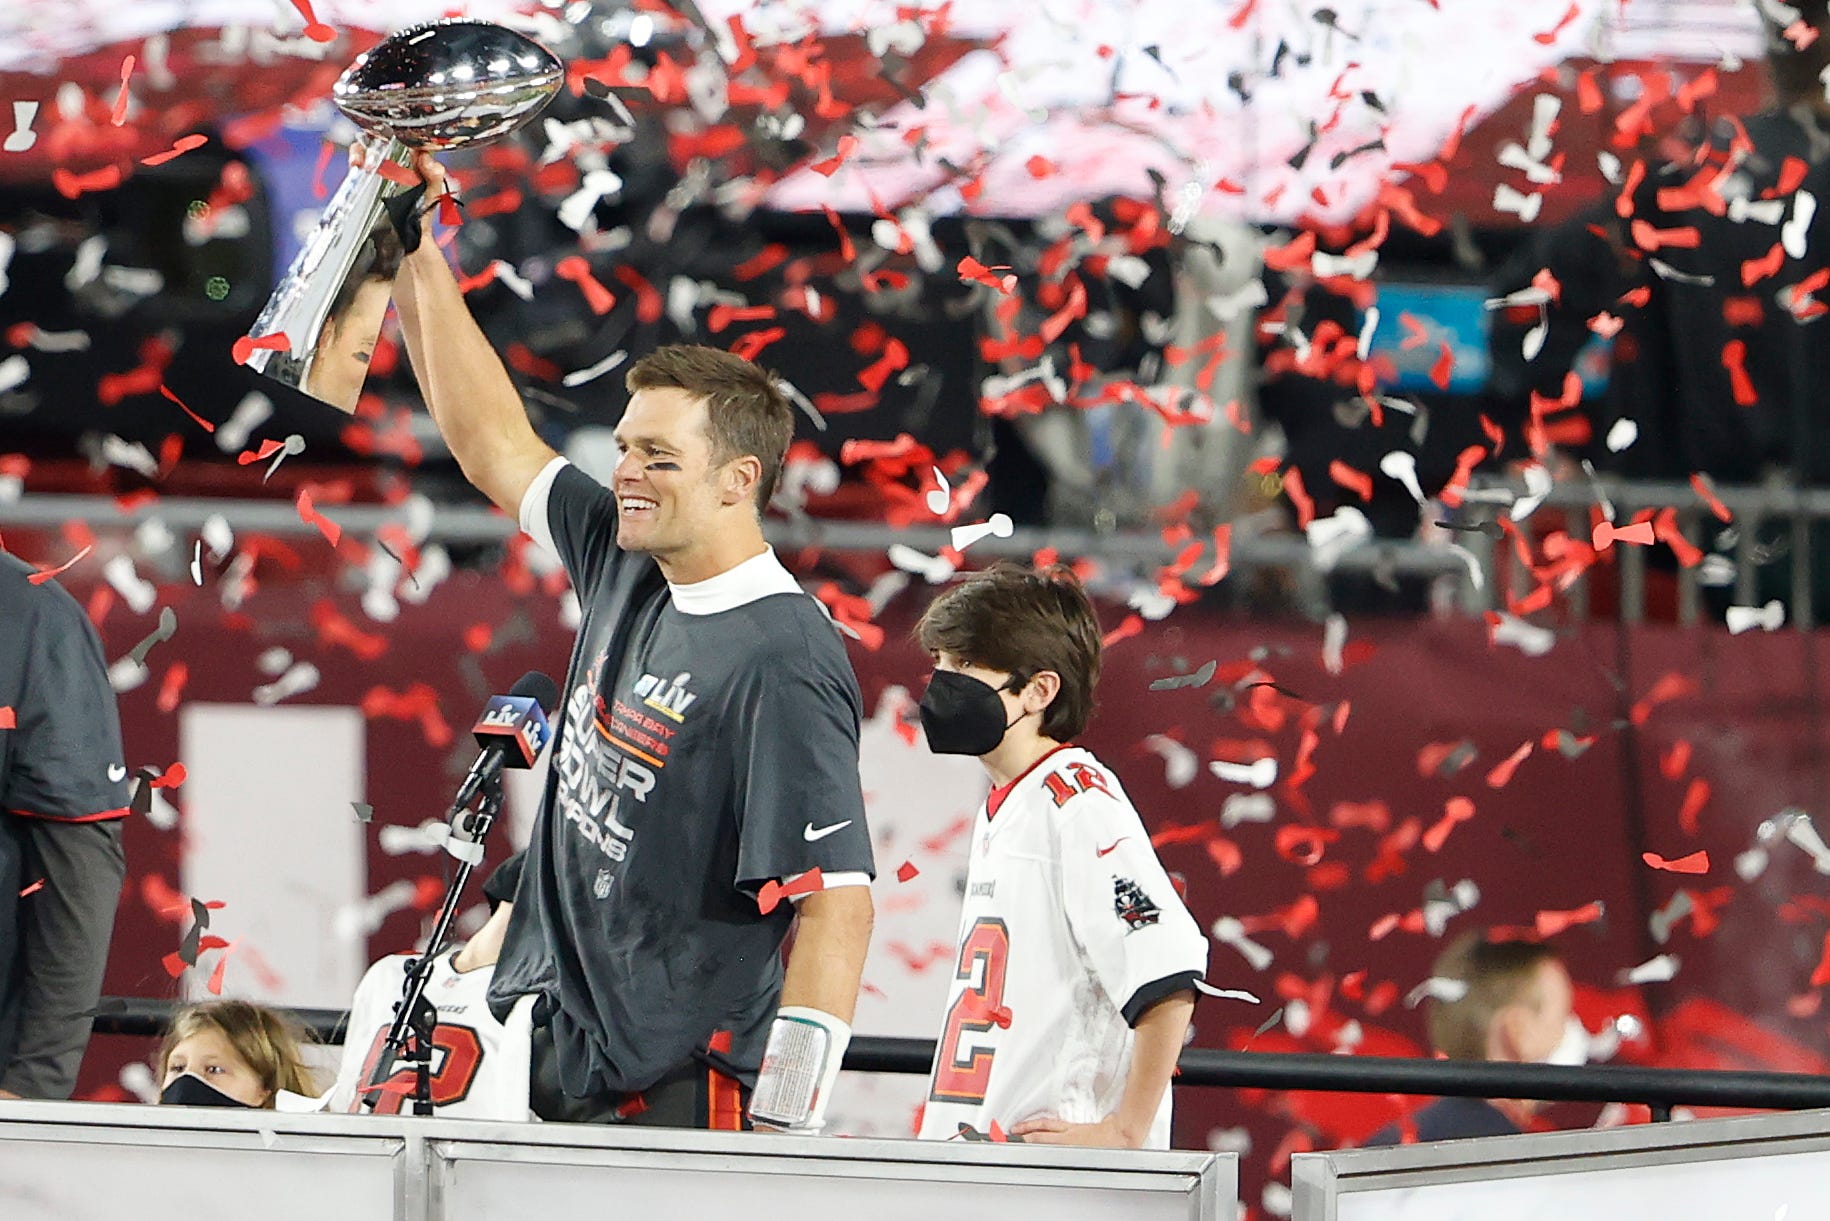 Tom Brady holds the Super Bowl trophy during the Tampa Bay Bucs' celebration.